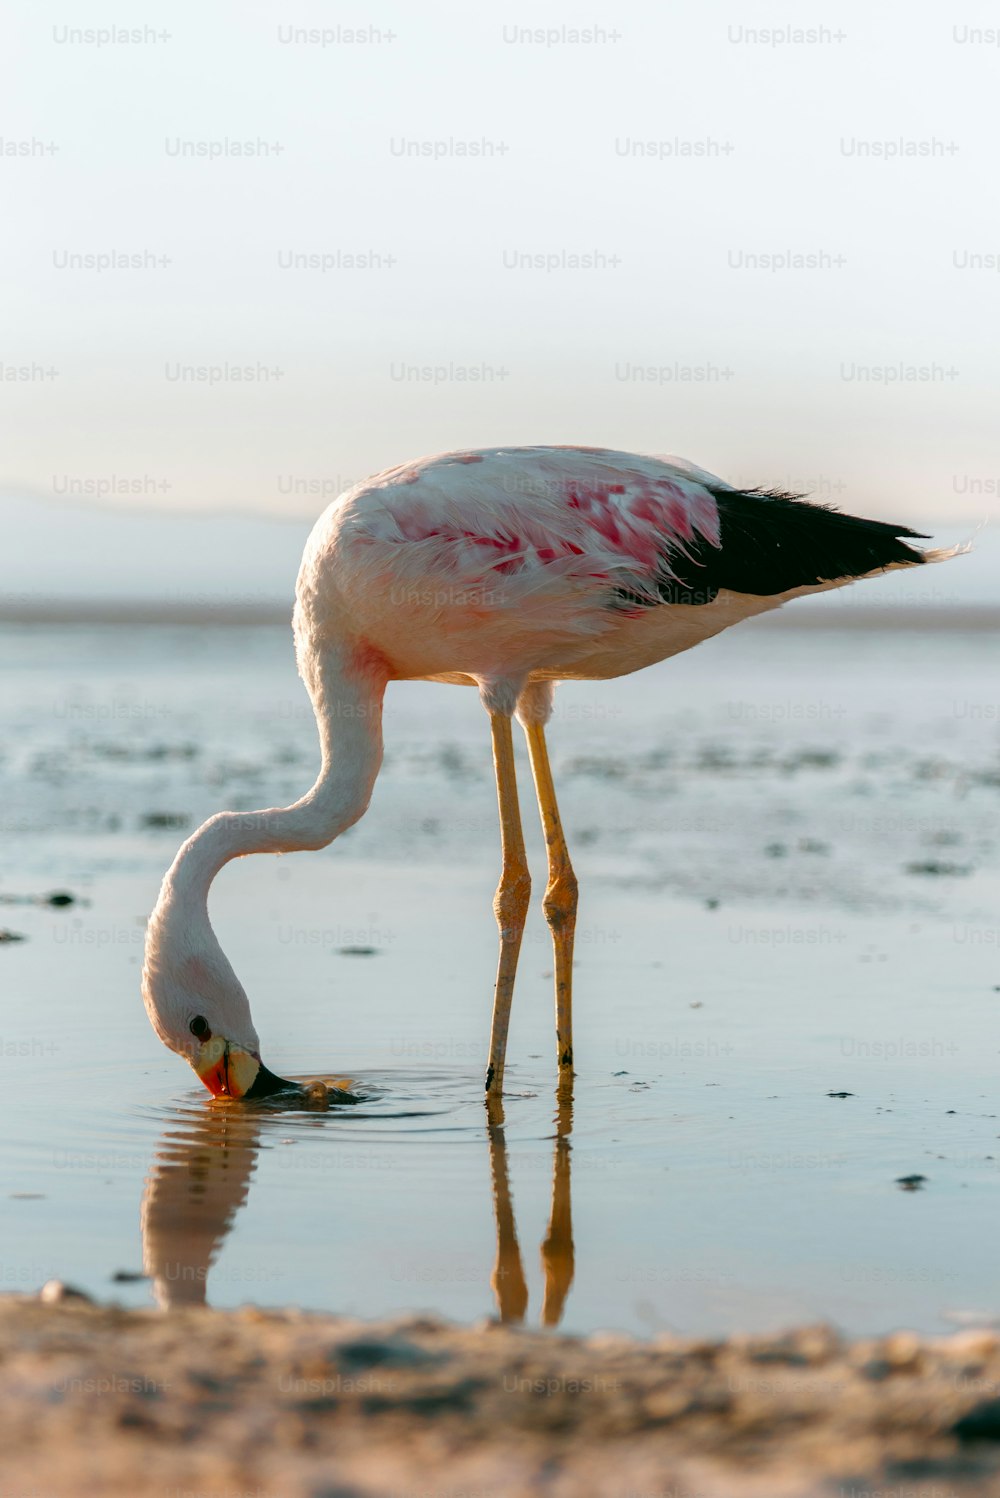 a flamingo standing in shallow water on a beach